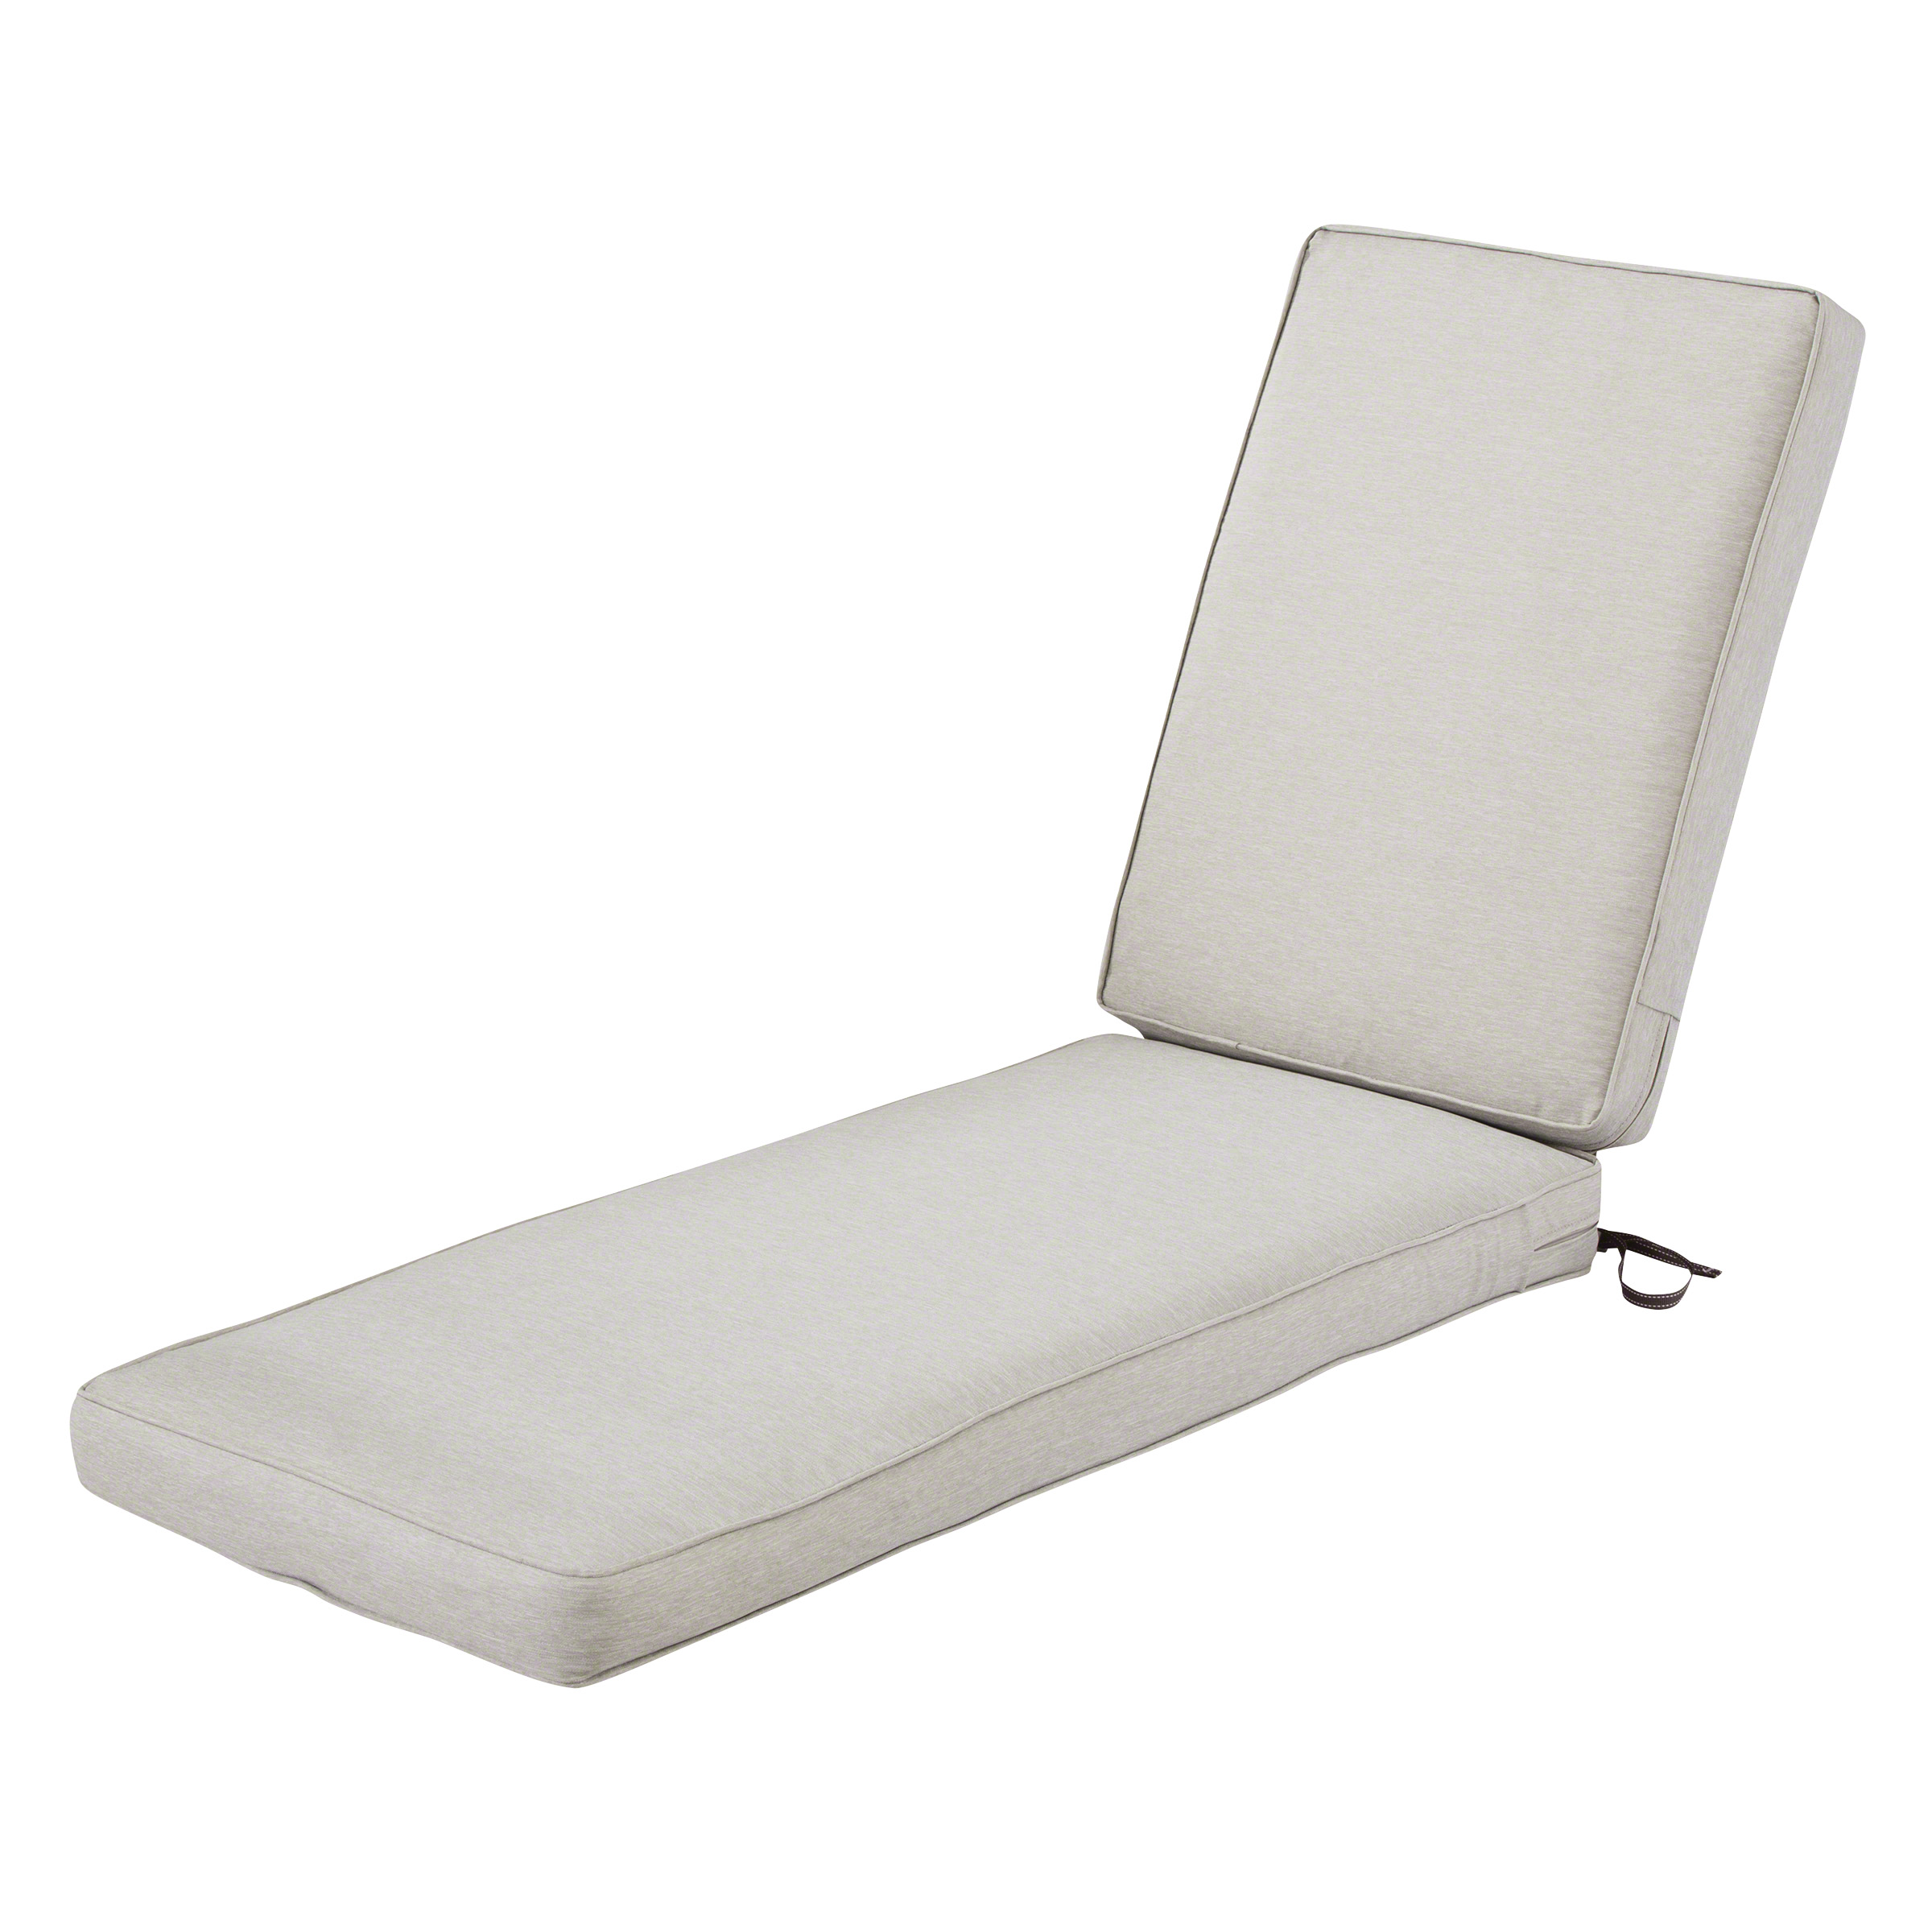 Classic Accessories Montlake FadeSafe Patio Chaise Lounge Cushion - 3" Thick ...